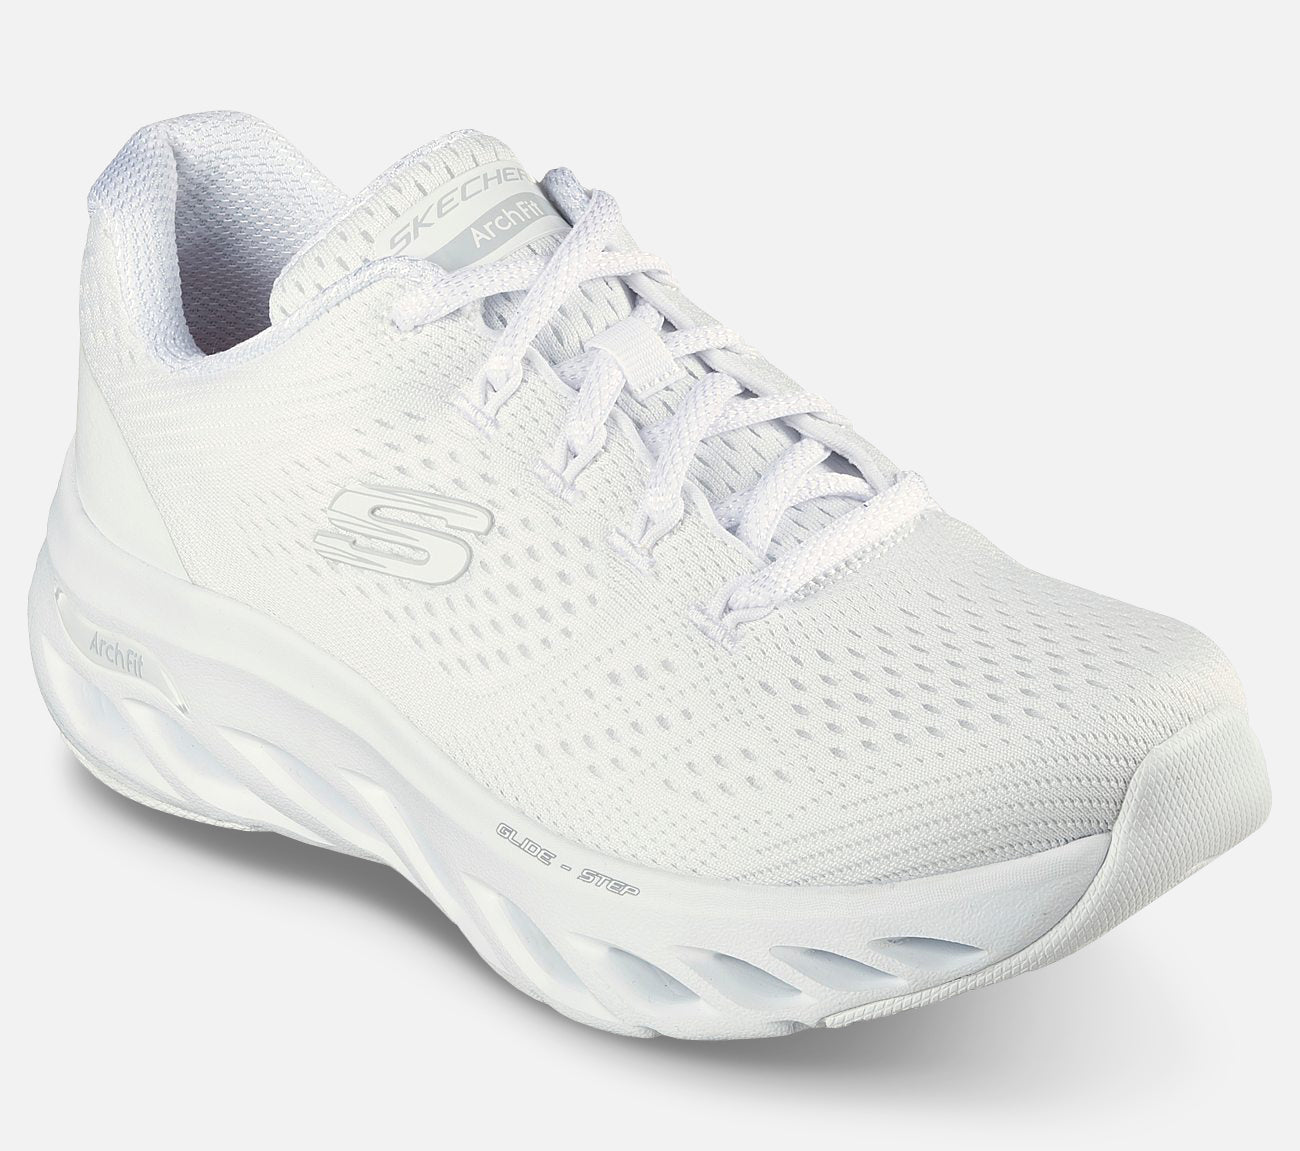 Arch Fit Glide-Step - Top Glory Shoe Skechers